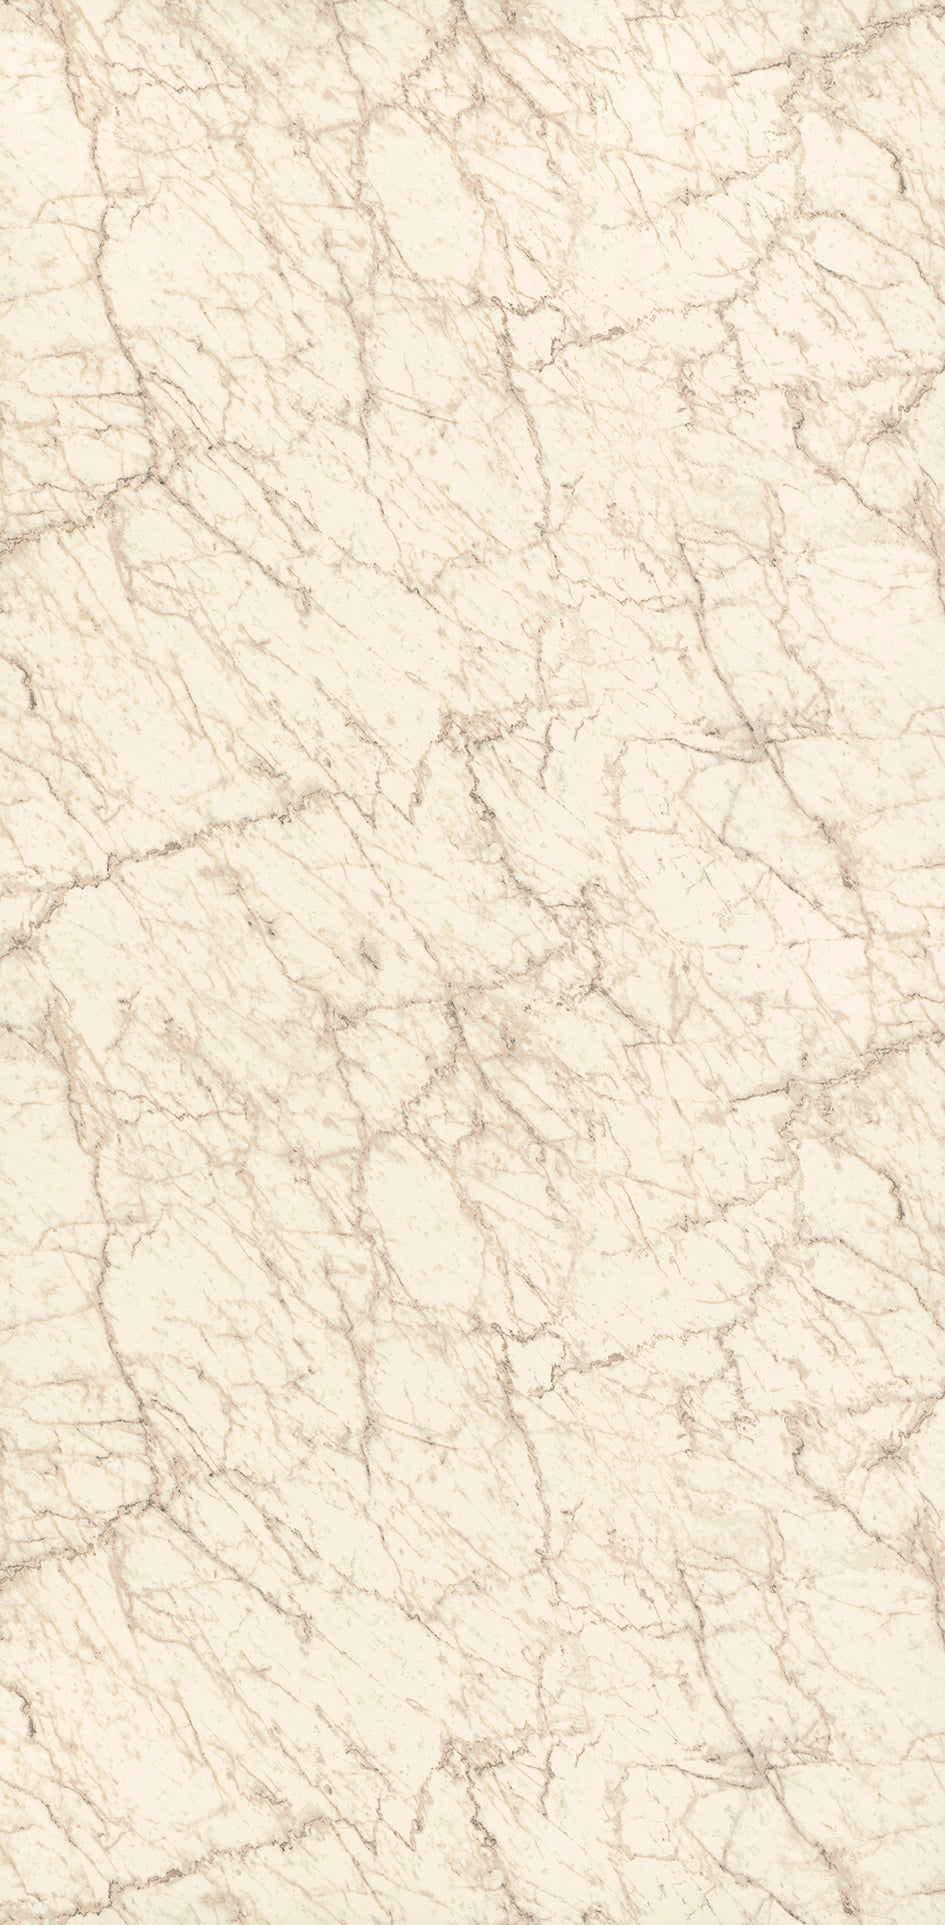 AKW 14160KM HPL AICA GLOSSY PURE WHITE ROOT MARBLE